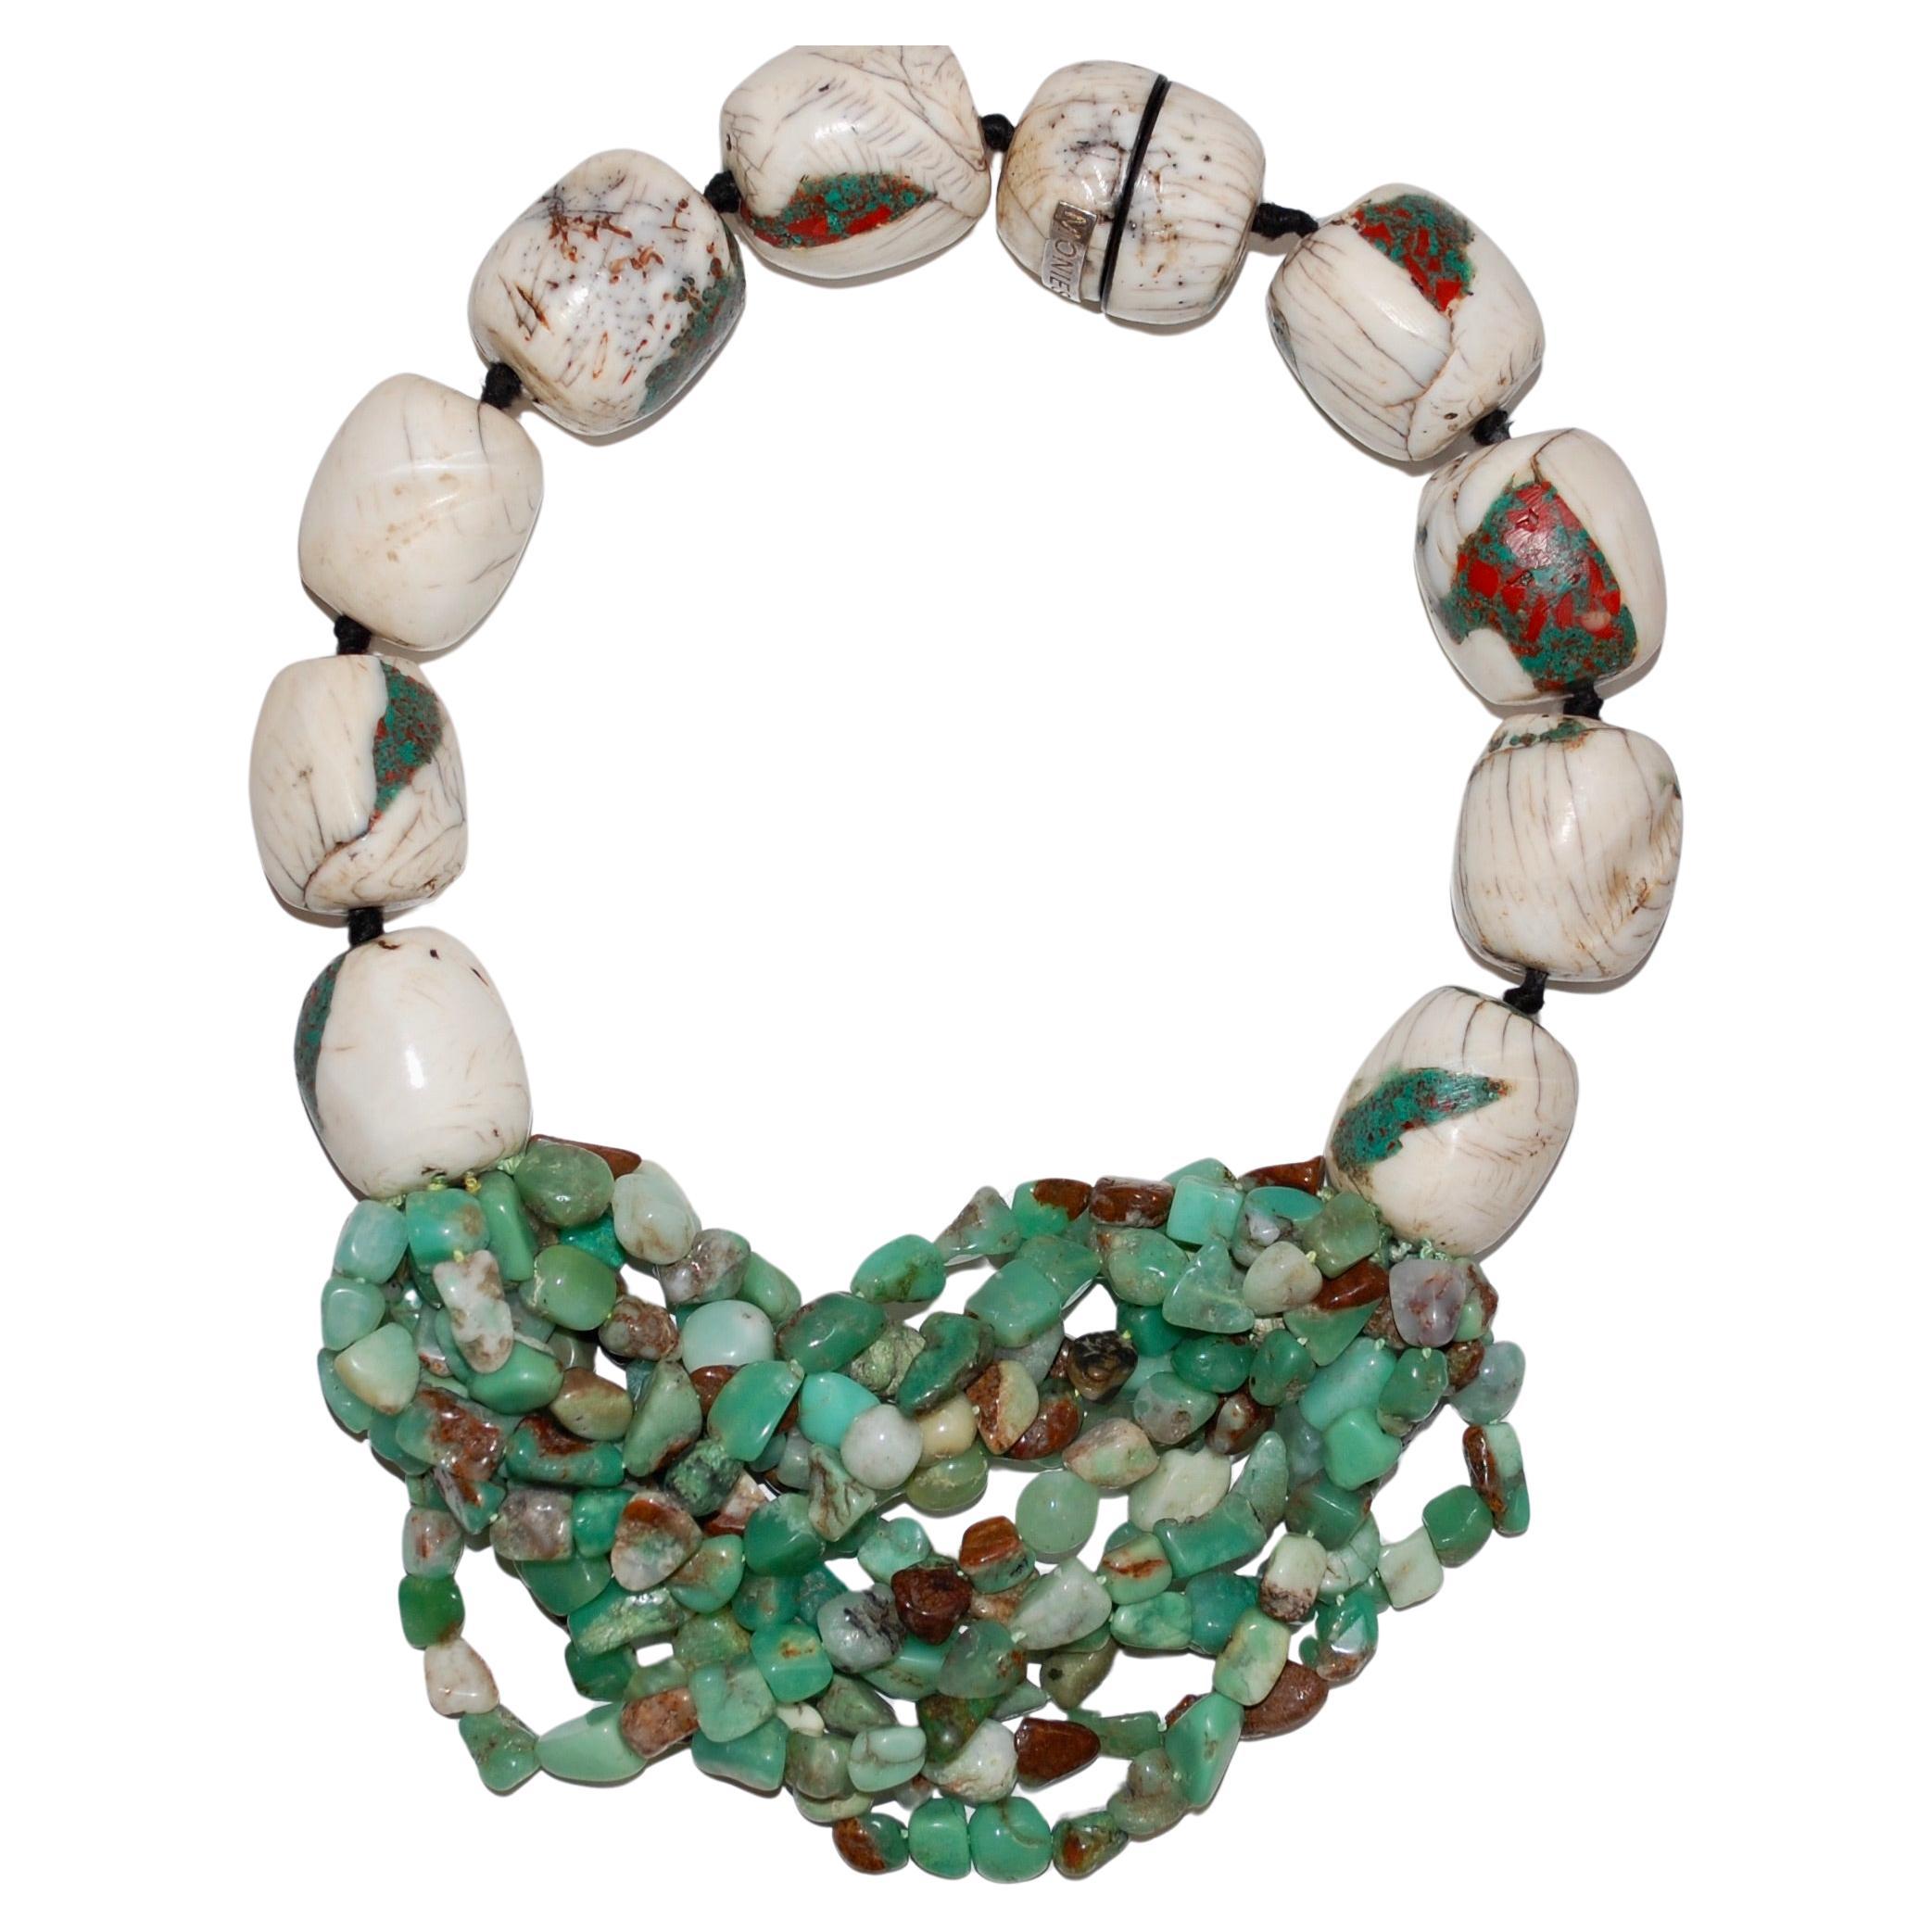  Monies Statement Necklace White Turquoise and Chrysoprase  For Sale